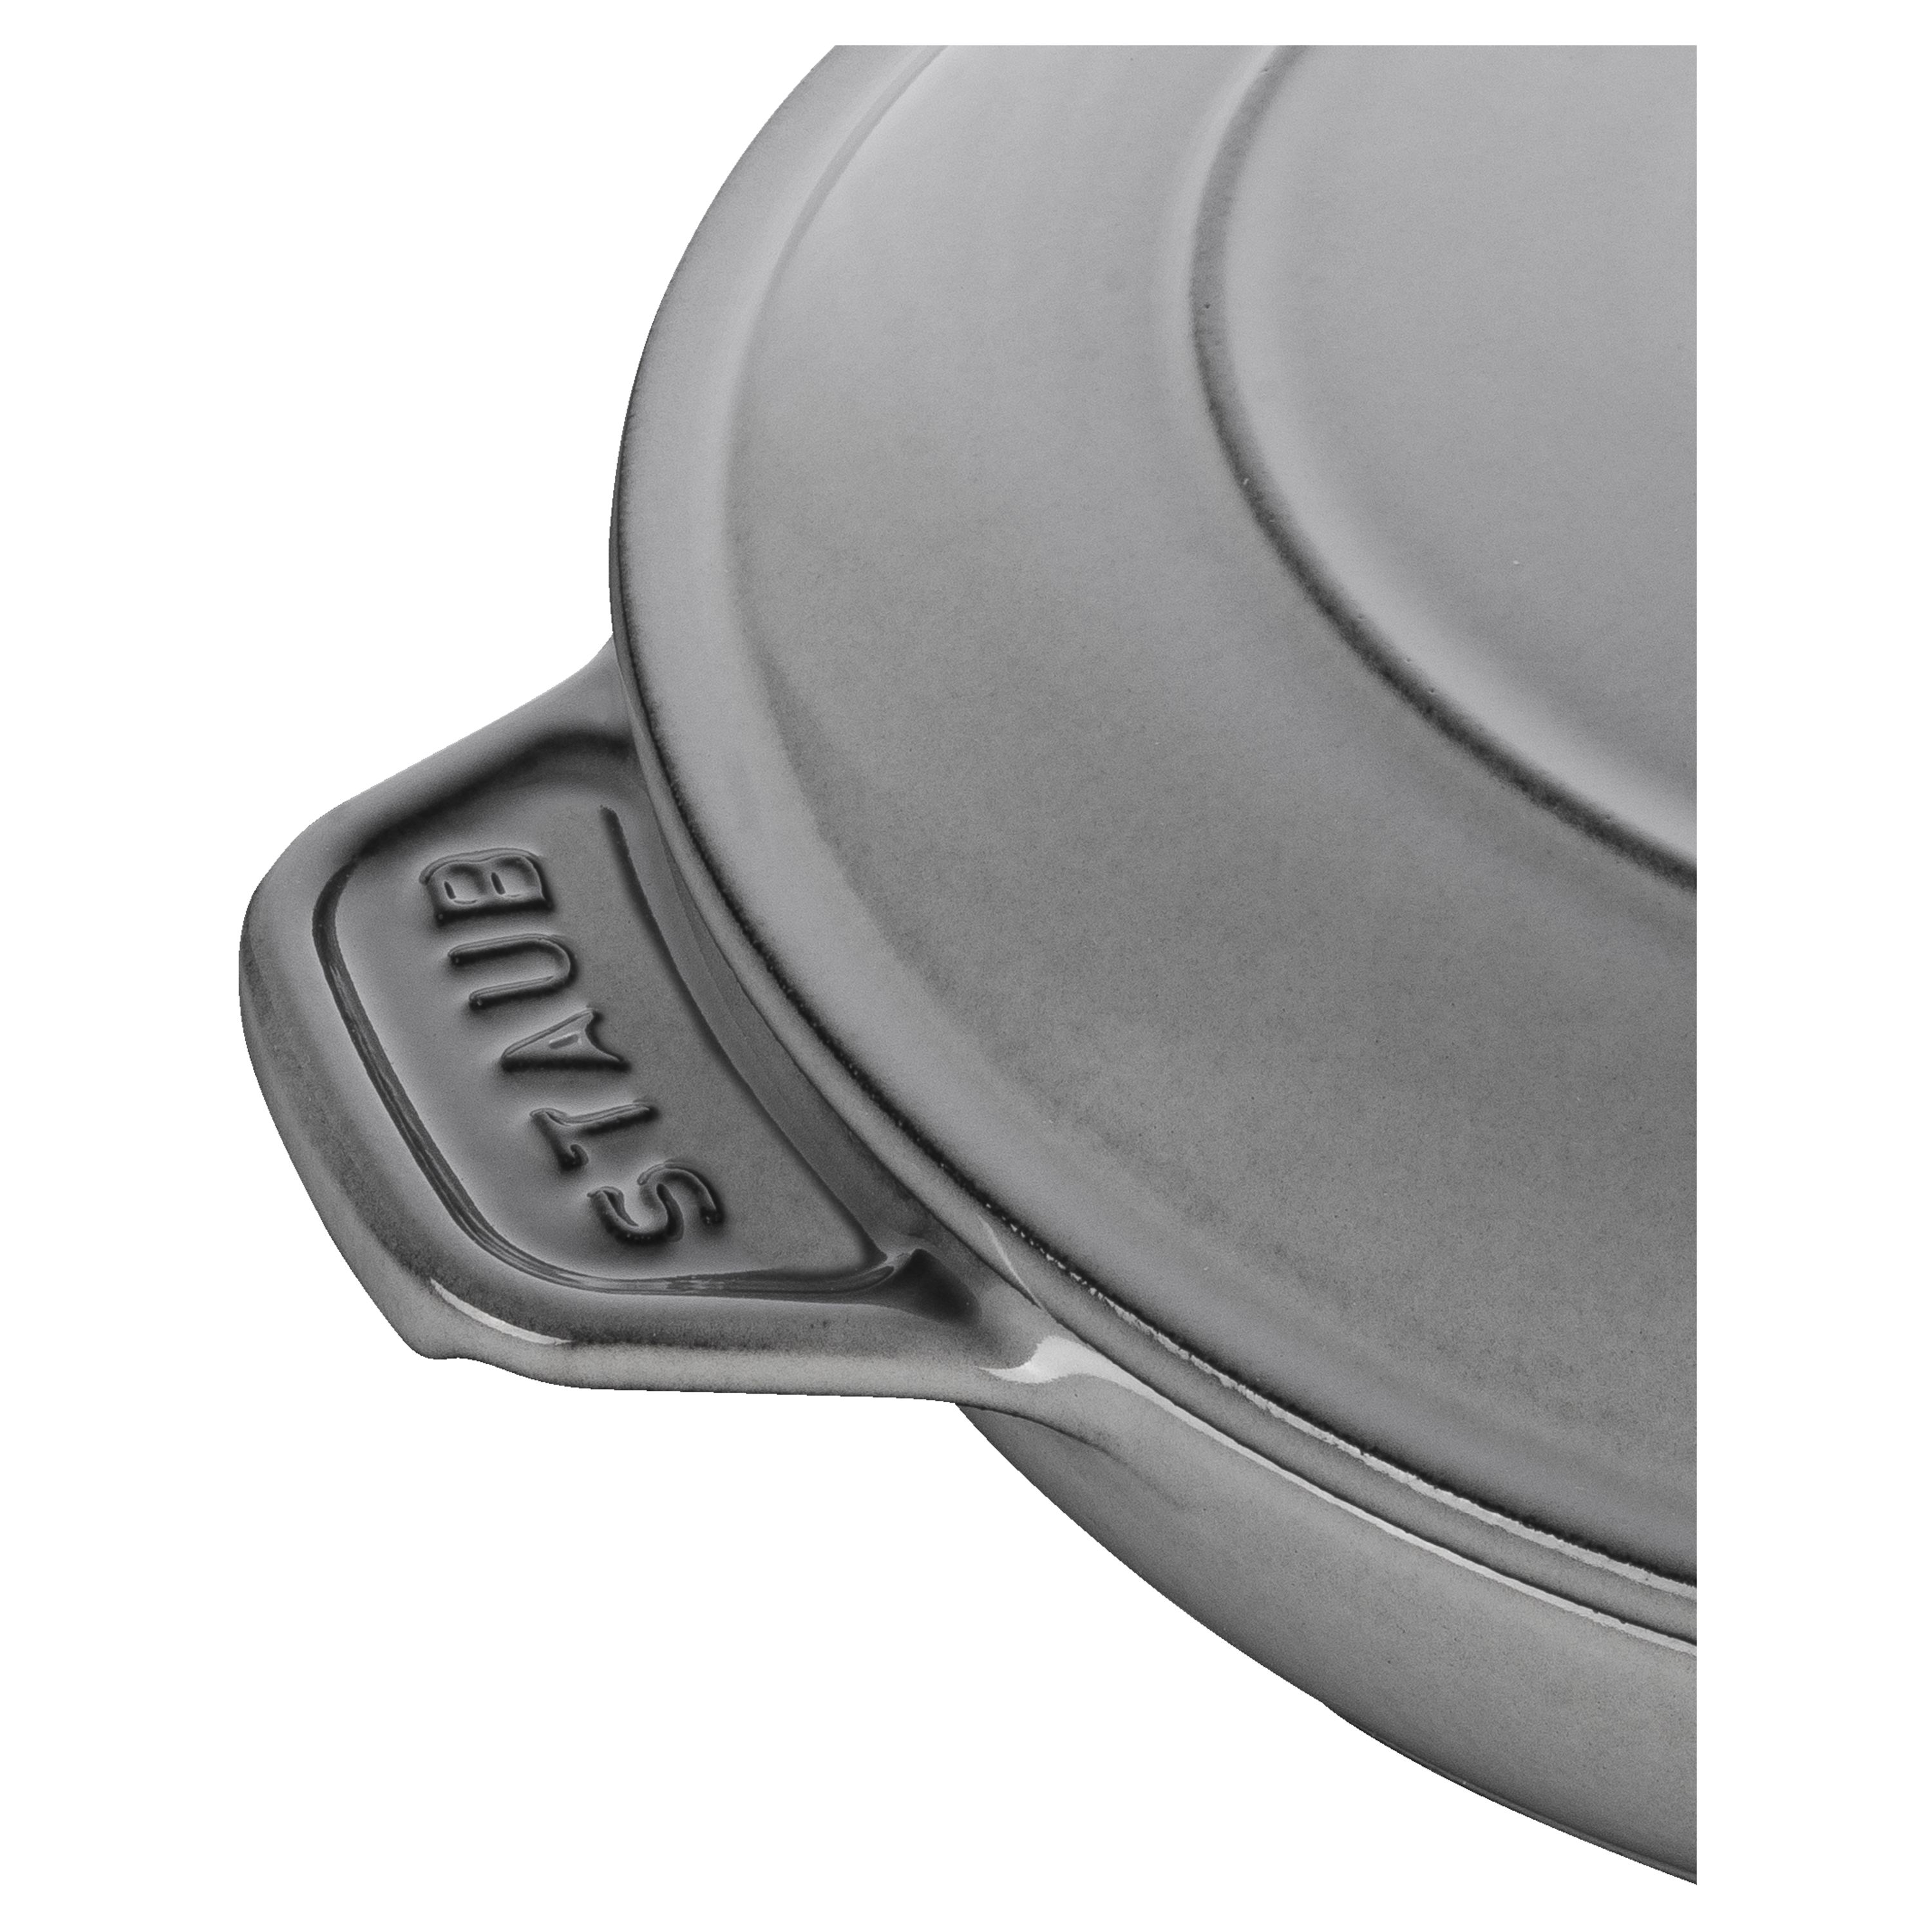 Staub Enameled Cast Iron Daily Pan with Glass Lid in Graphite Grey — Las  Cosas Kitchen Shoppe